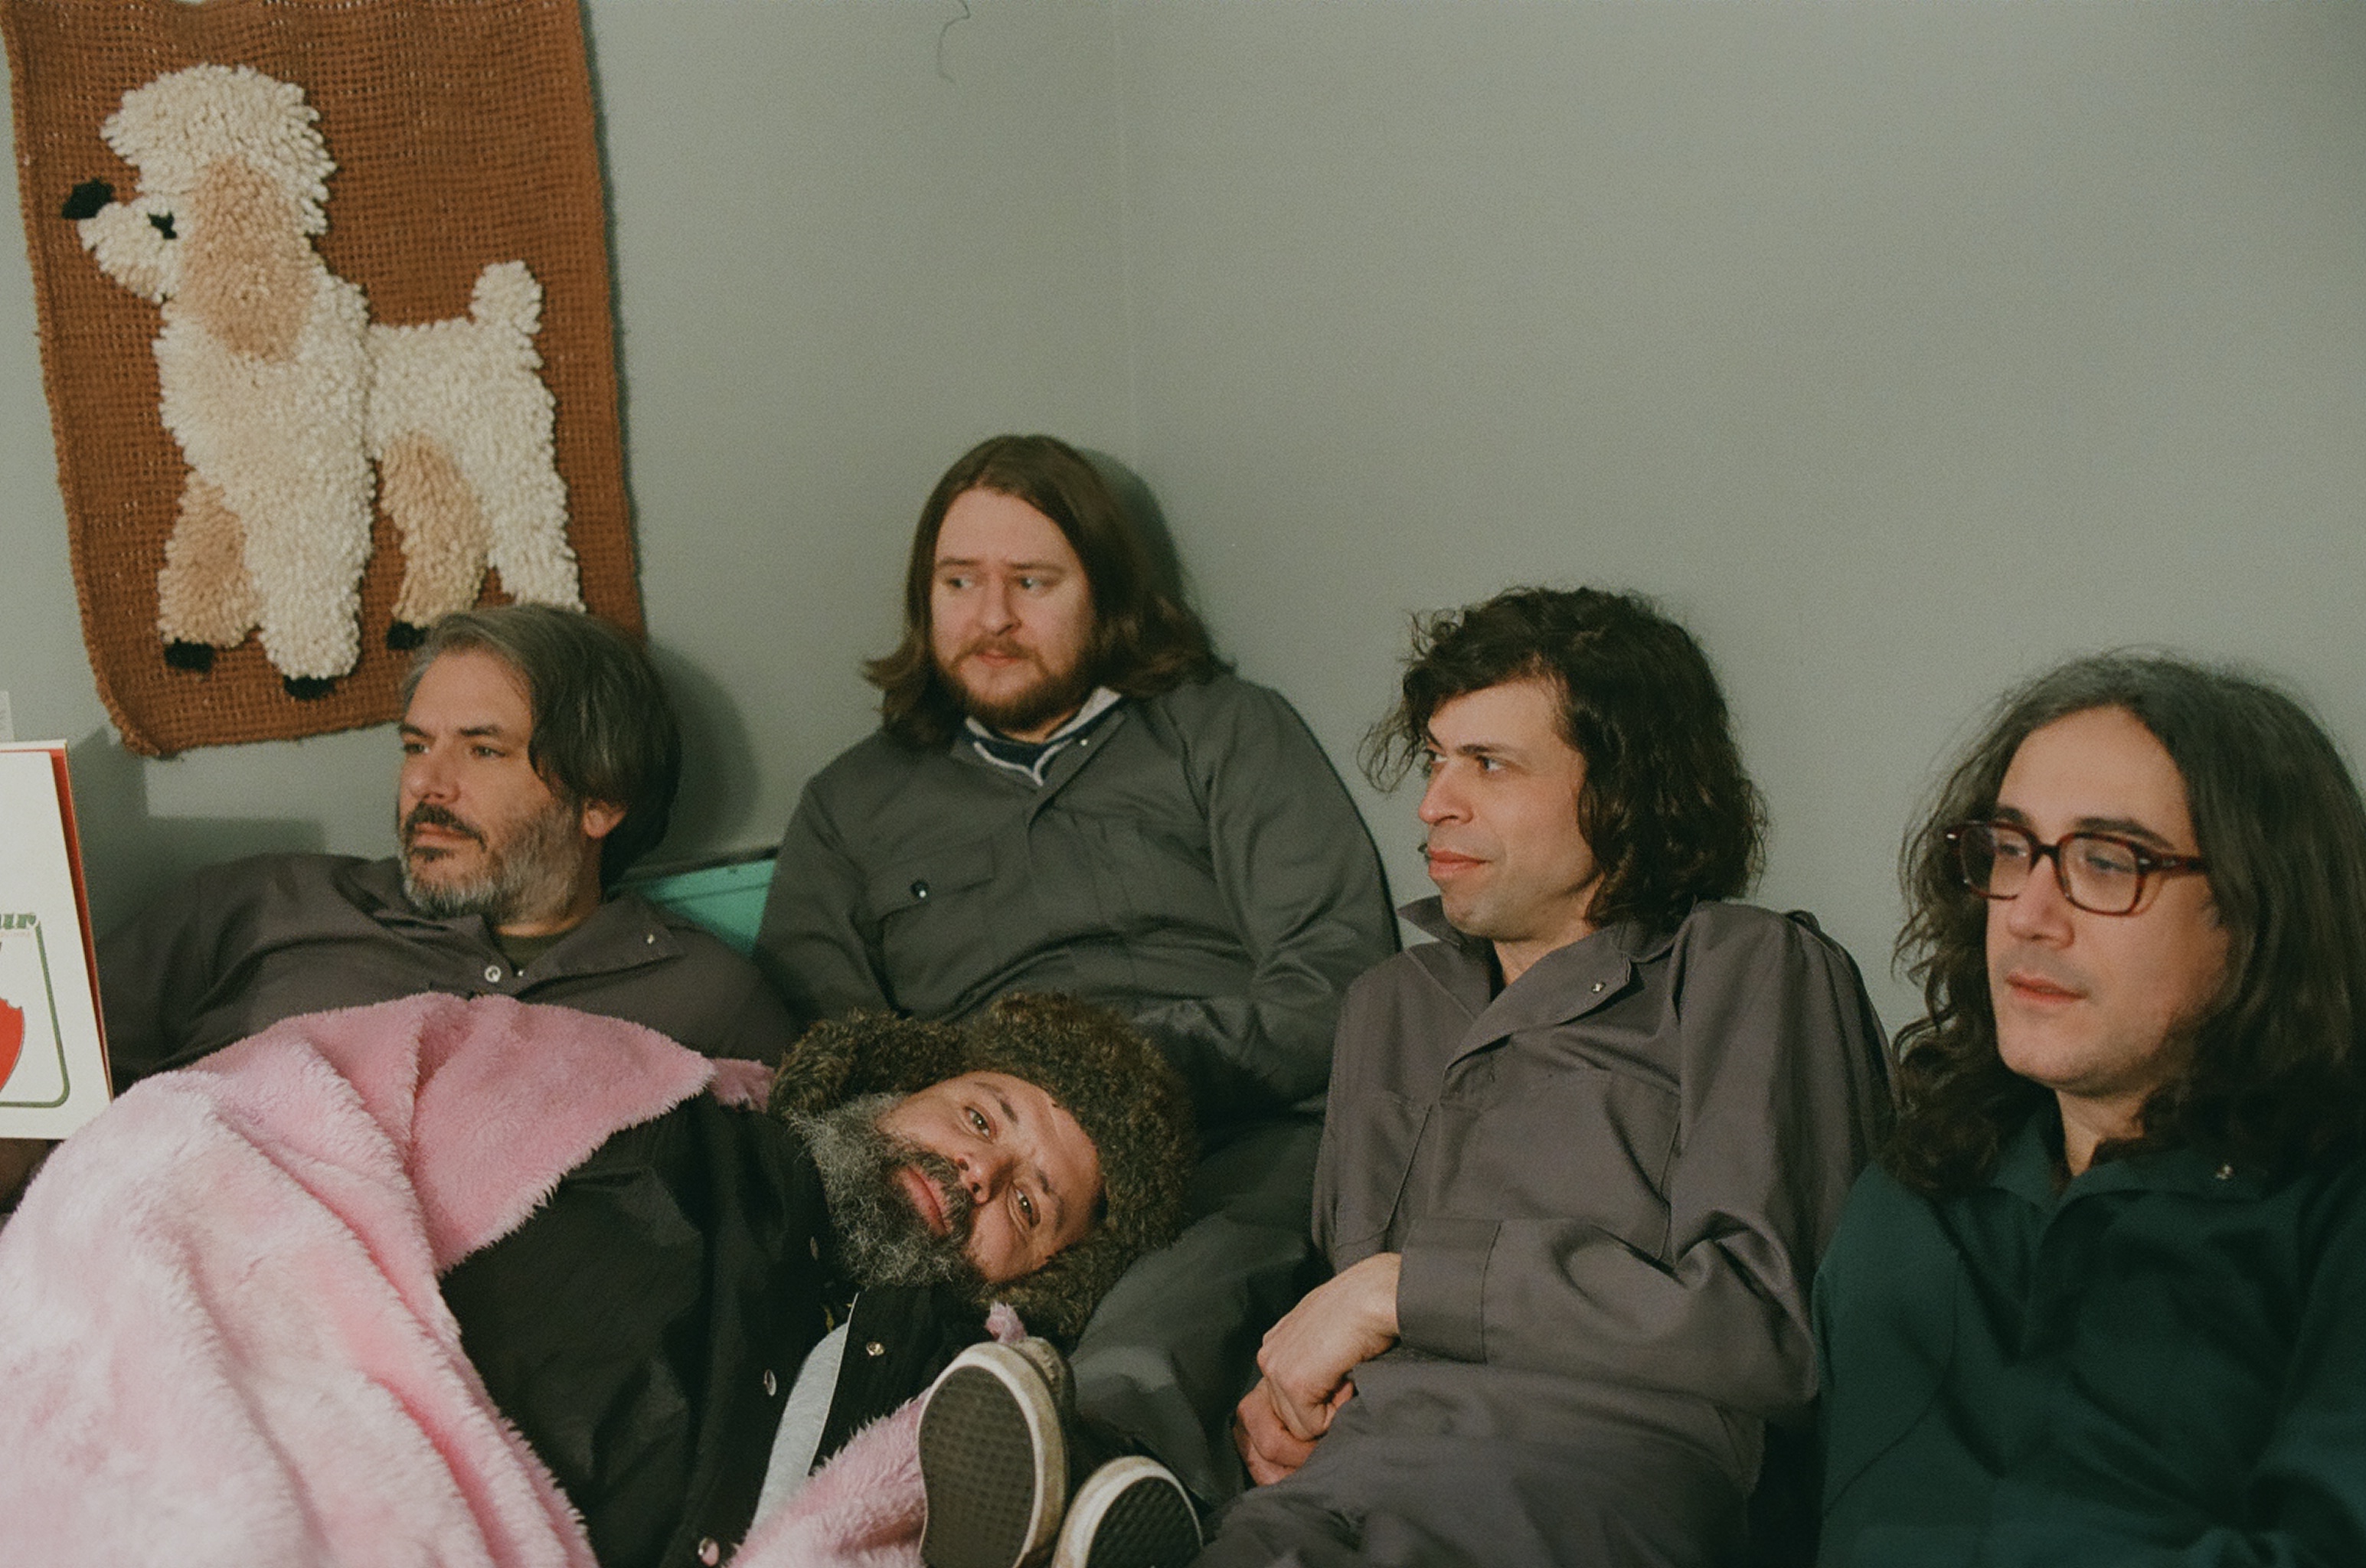 The five members of les Hôtesses d'Hilaire sitting on a couch. There is poodle artwork in the background